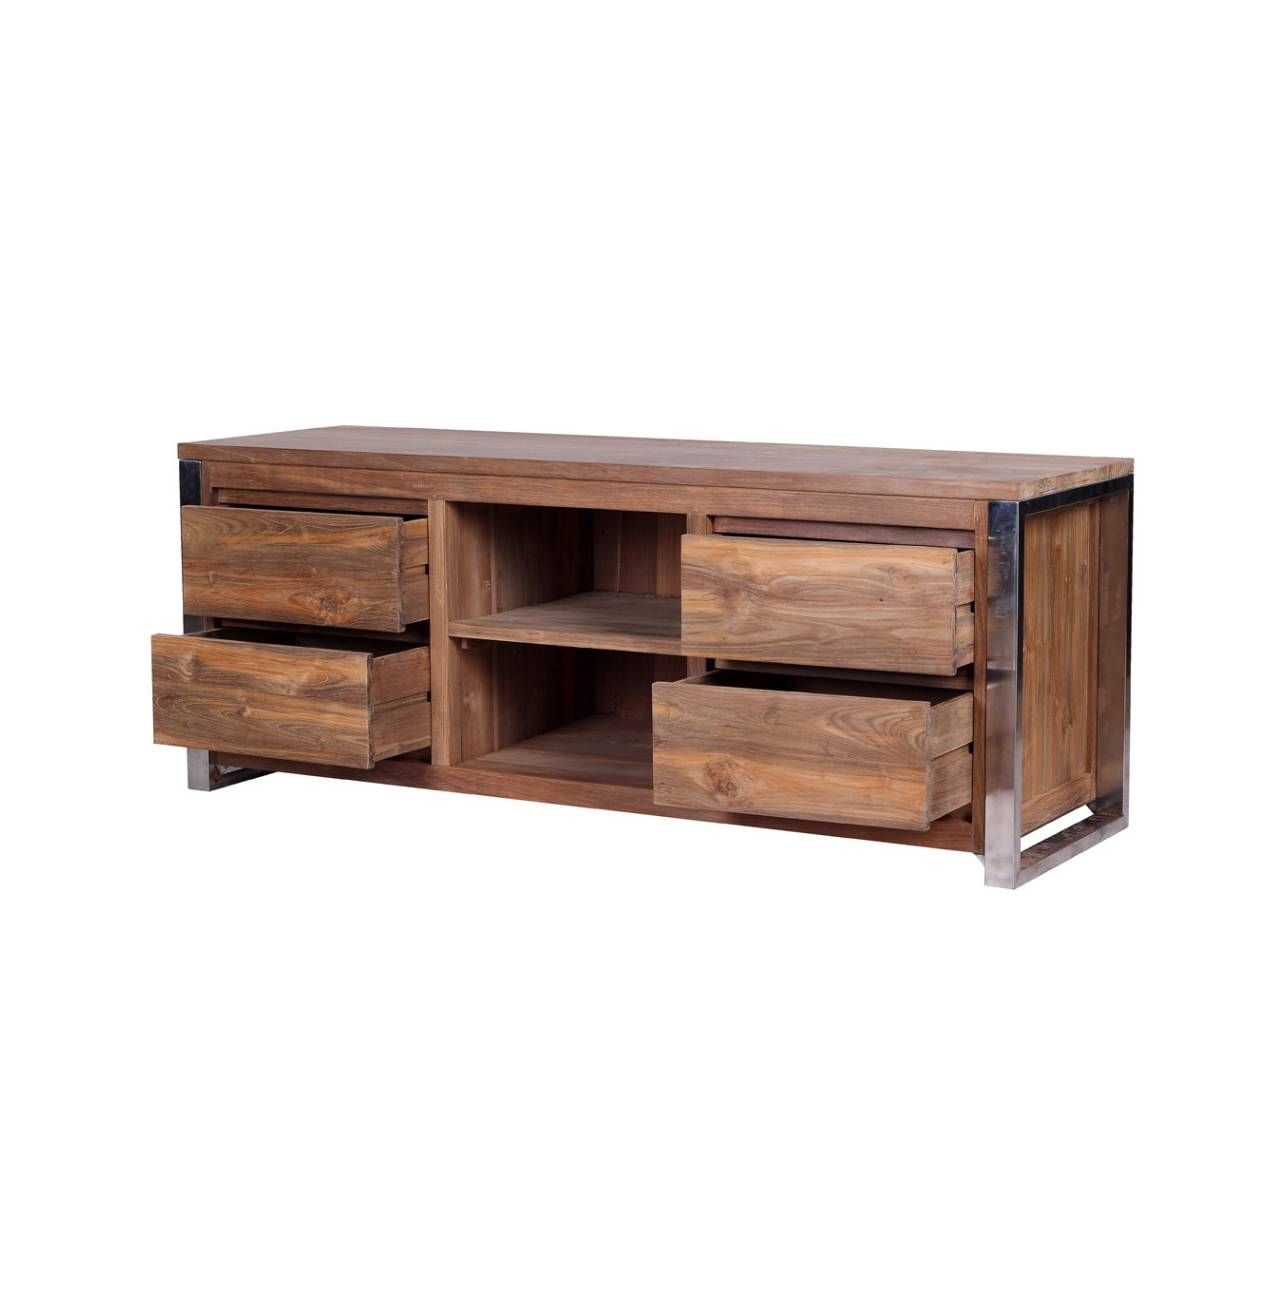 Rarem Reclaimed Wood Tv Stand – Reclaimed Teak And Stainless Steel Within Wood And Metal Tv Stands (View 9 of 15)